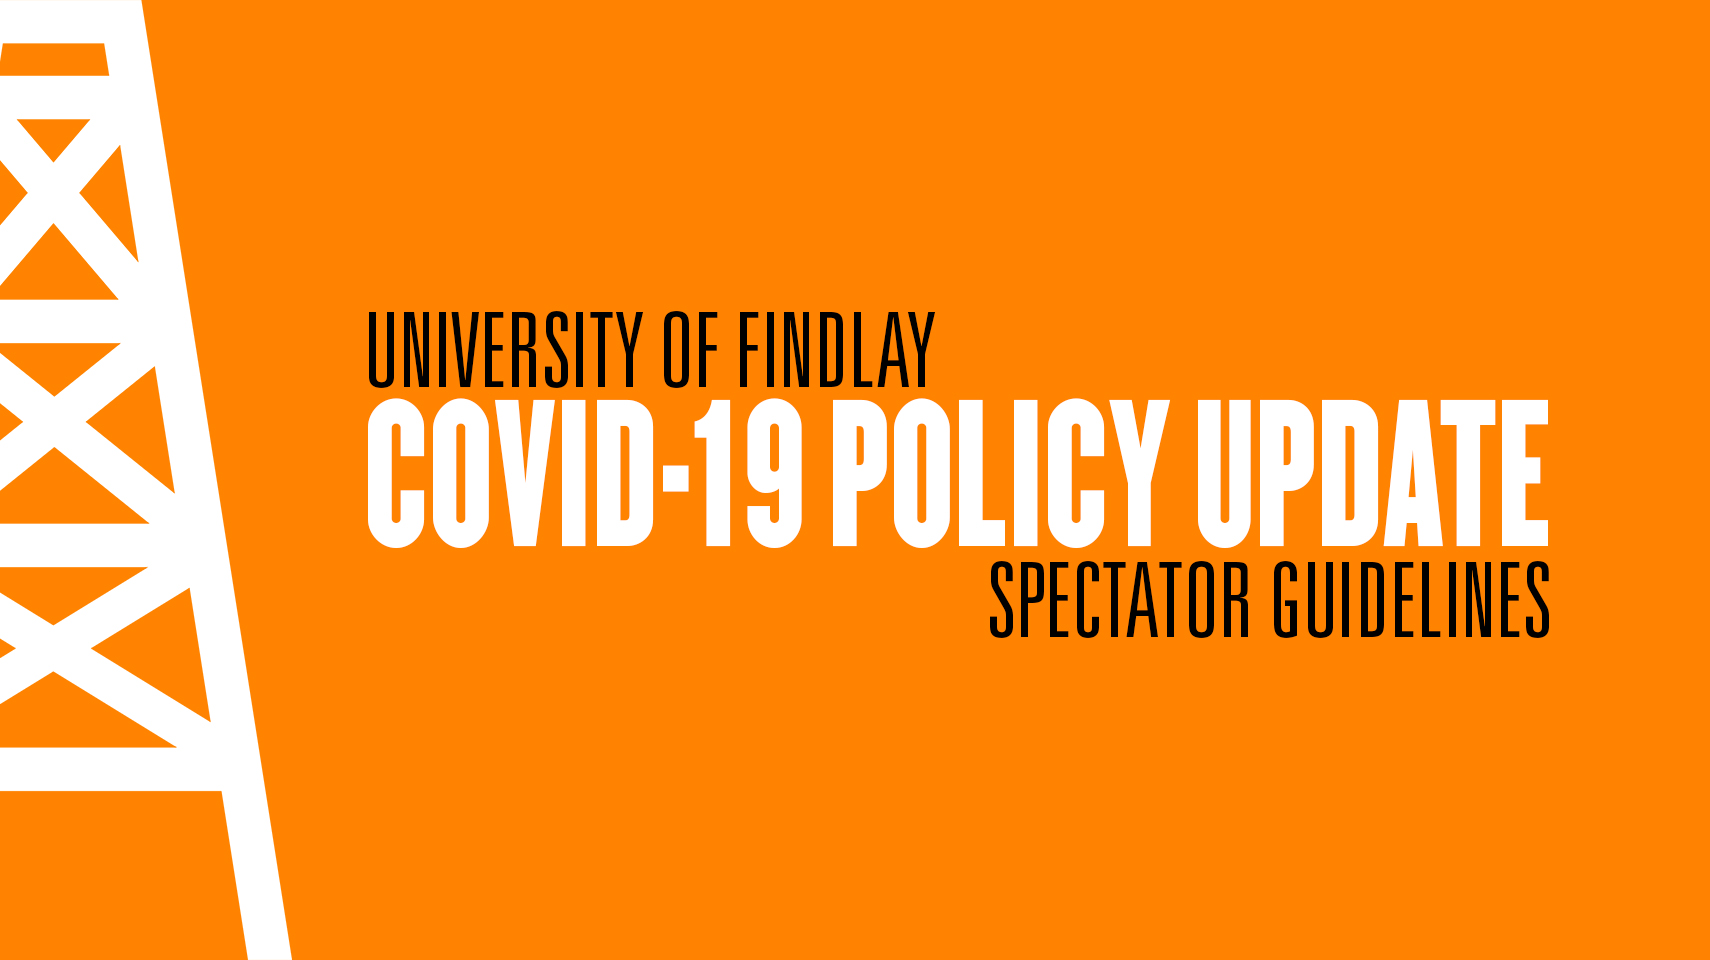 Spectator Guidelines for COVID-19